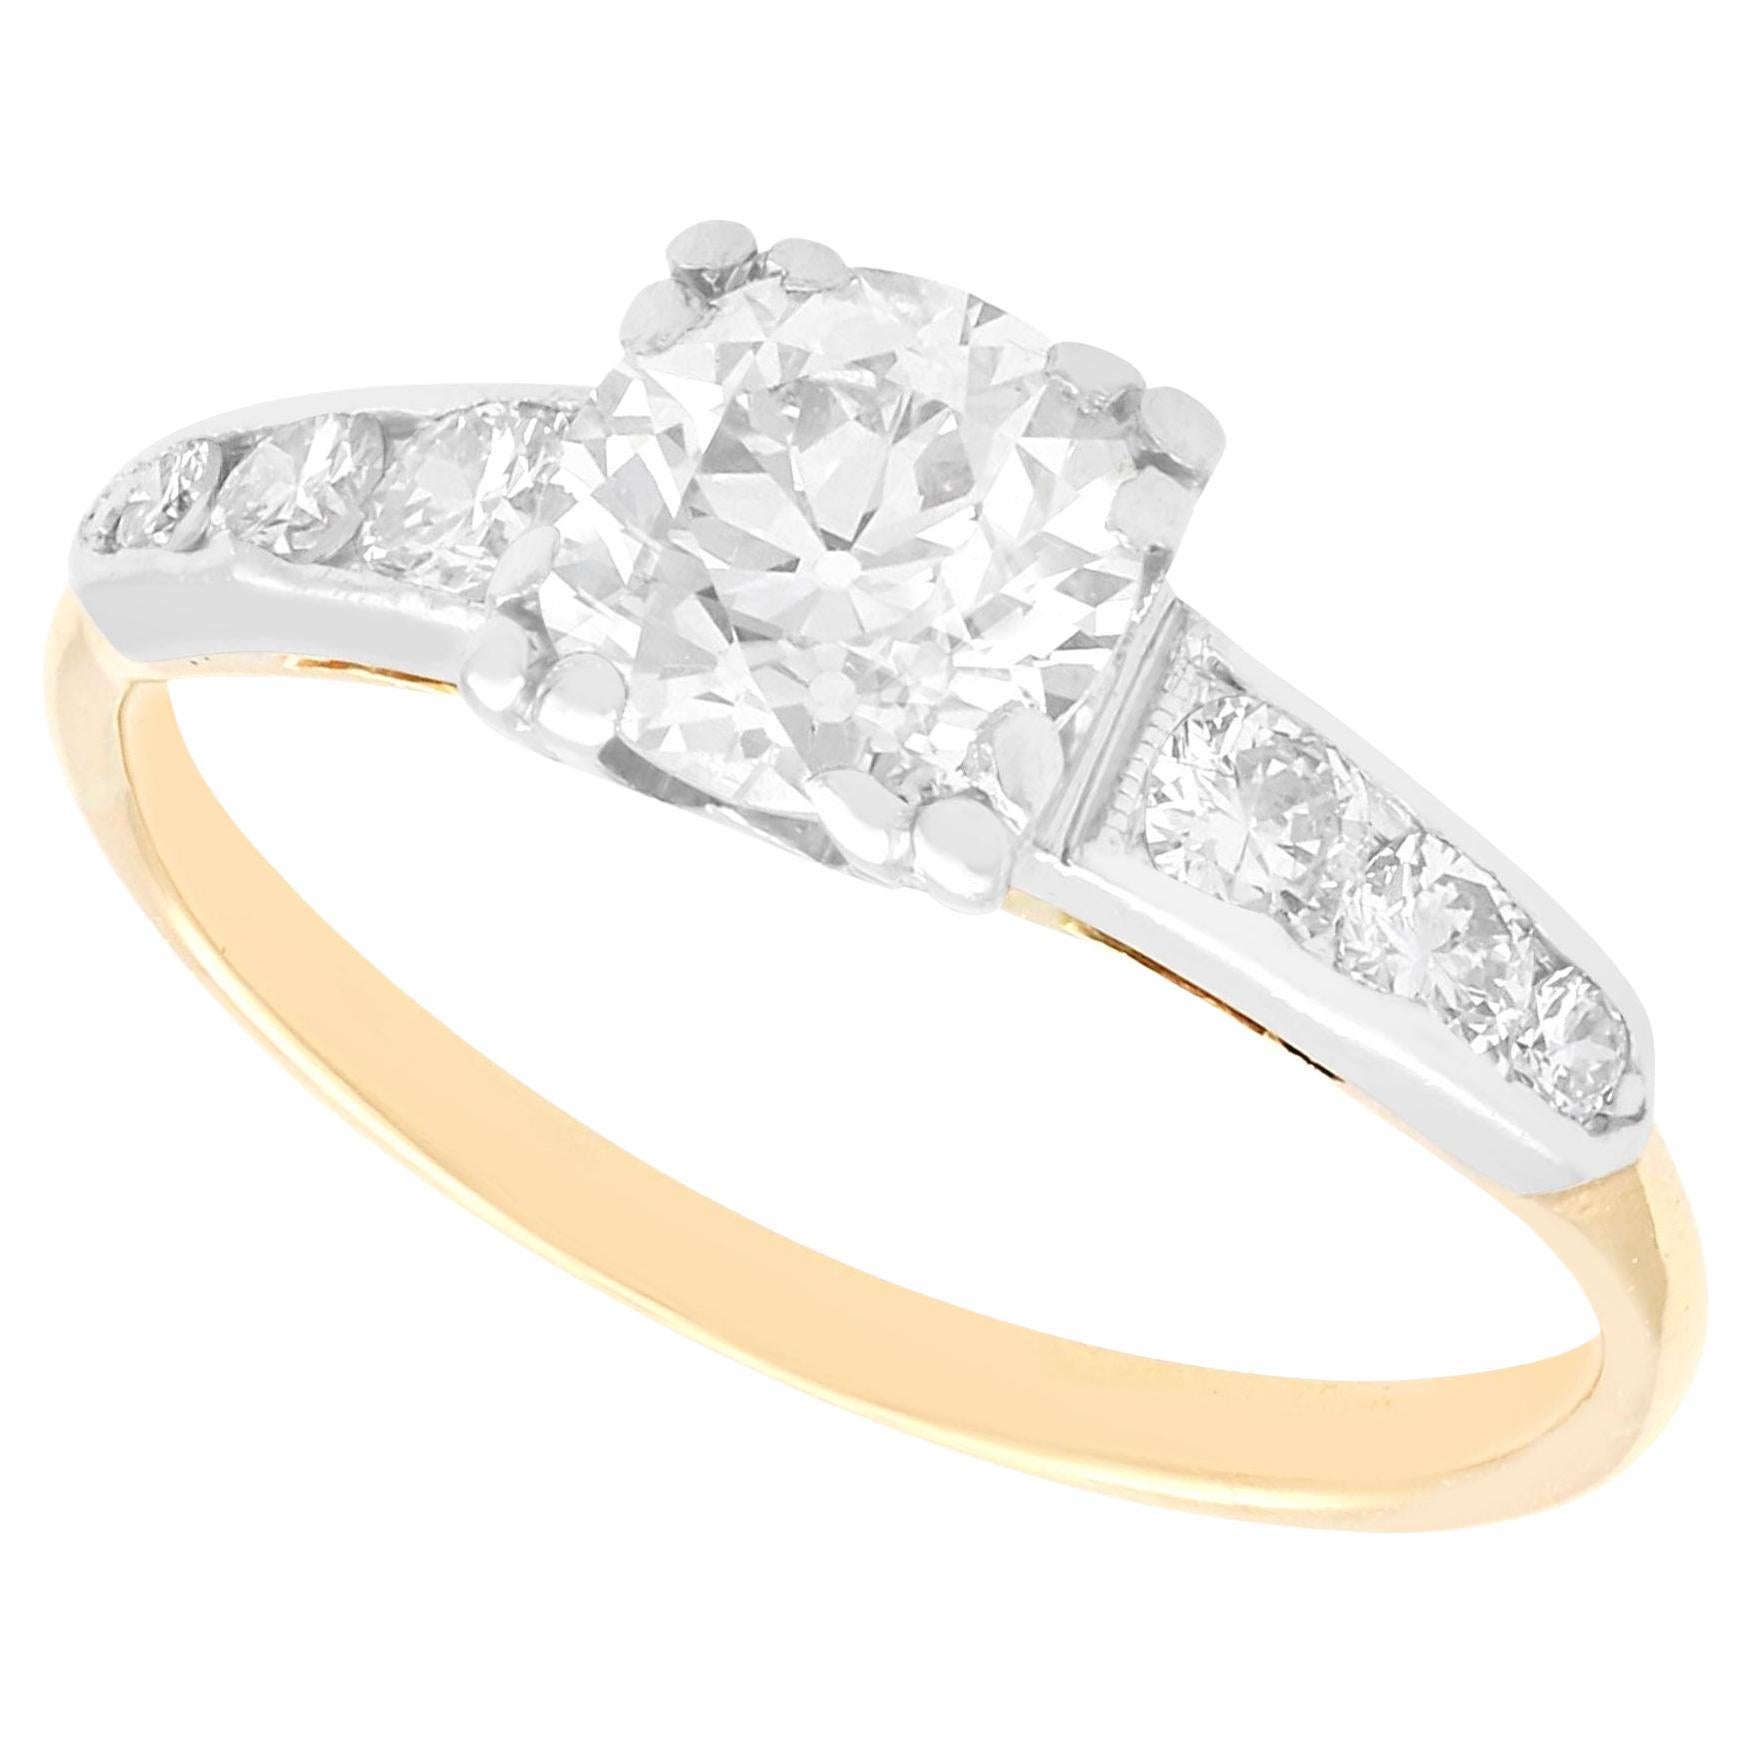 Antique 1.18 Carat Diamond and Yellow Gold Solitaire Ring